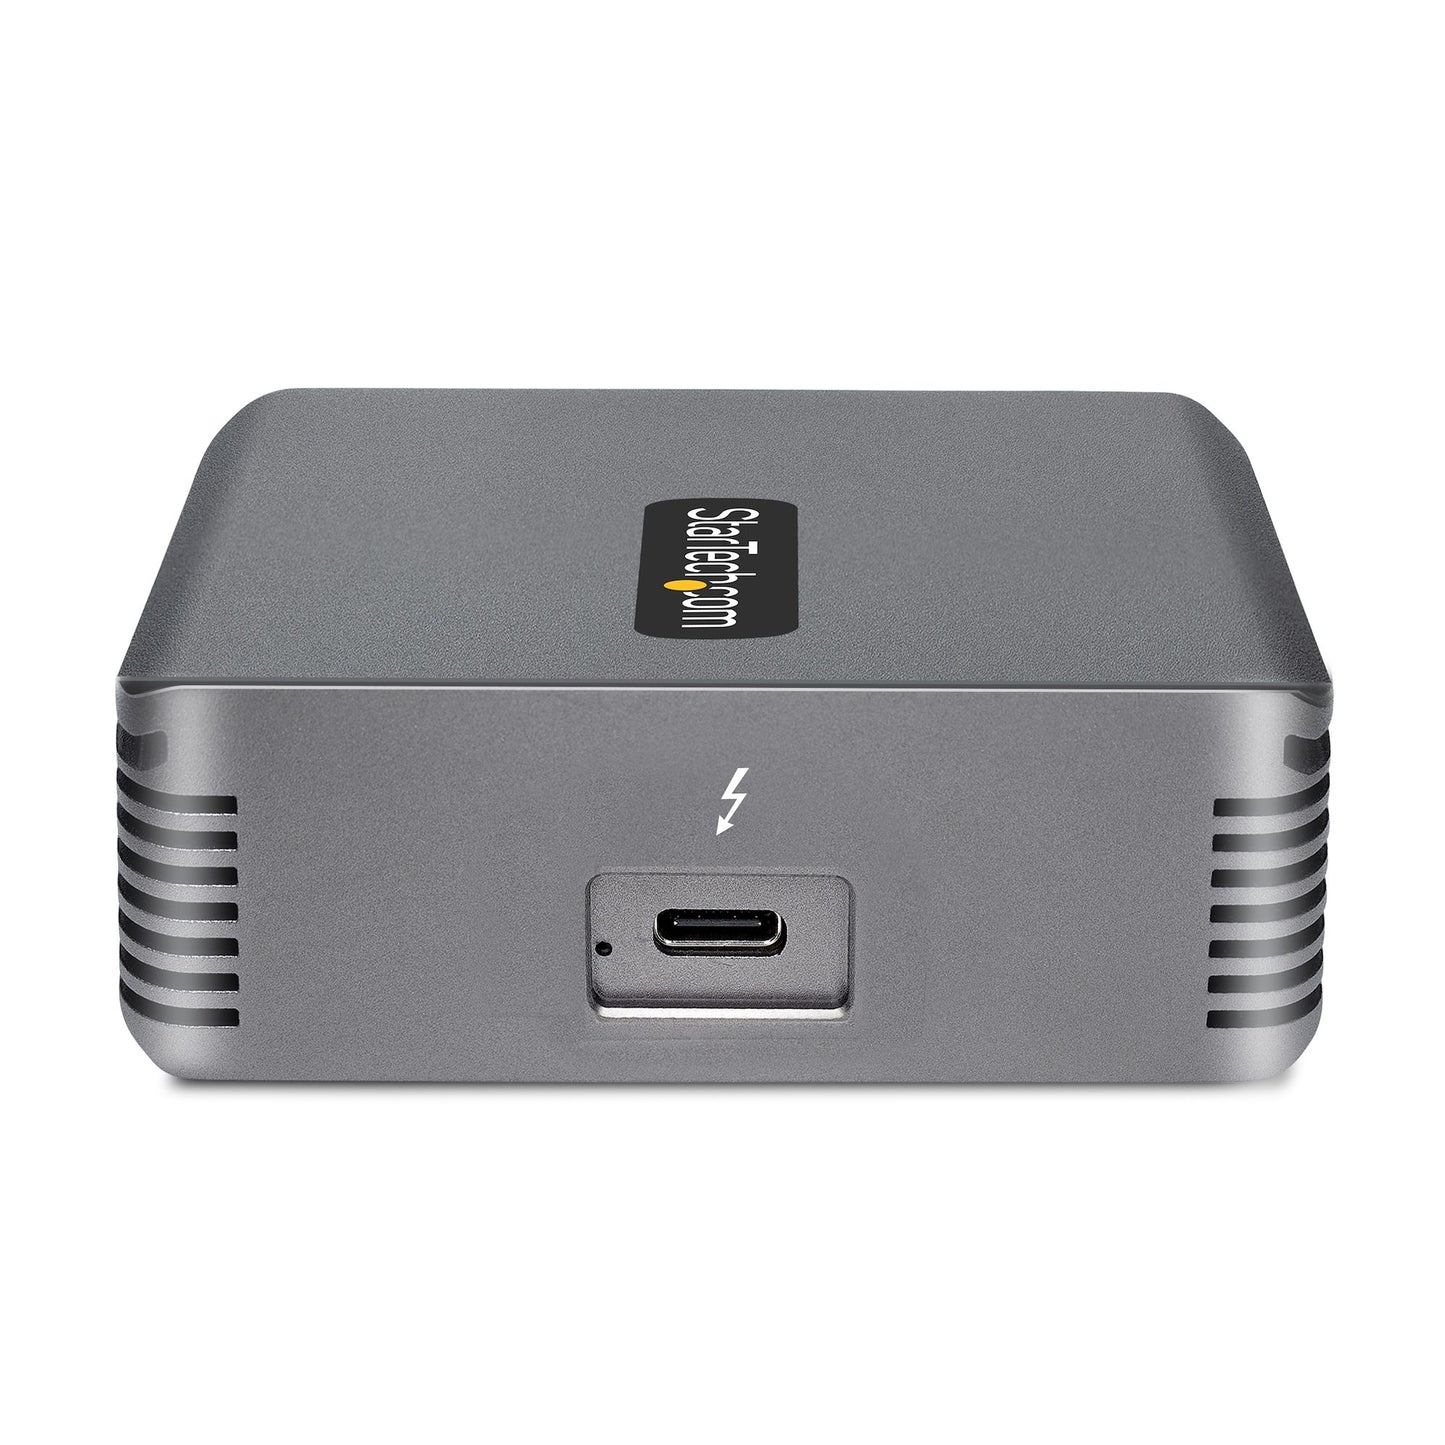 Adaptador de Red Ethernet Externo STARTECH Thunderbolt 3 a RJ45 - 10GbE - NIC 10GBASE-T/5-2.5GBASE-T - 10Gb - Cable TB3 - Win/Mac